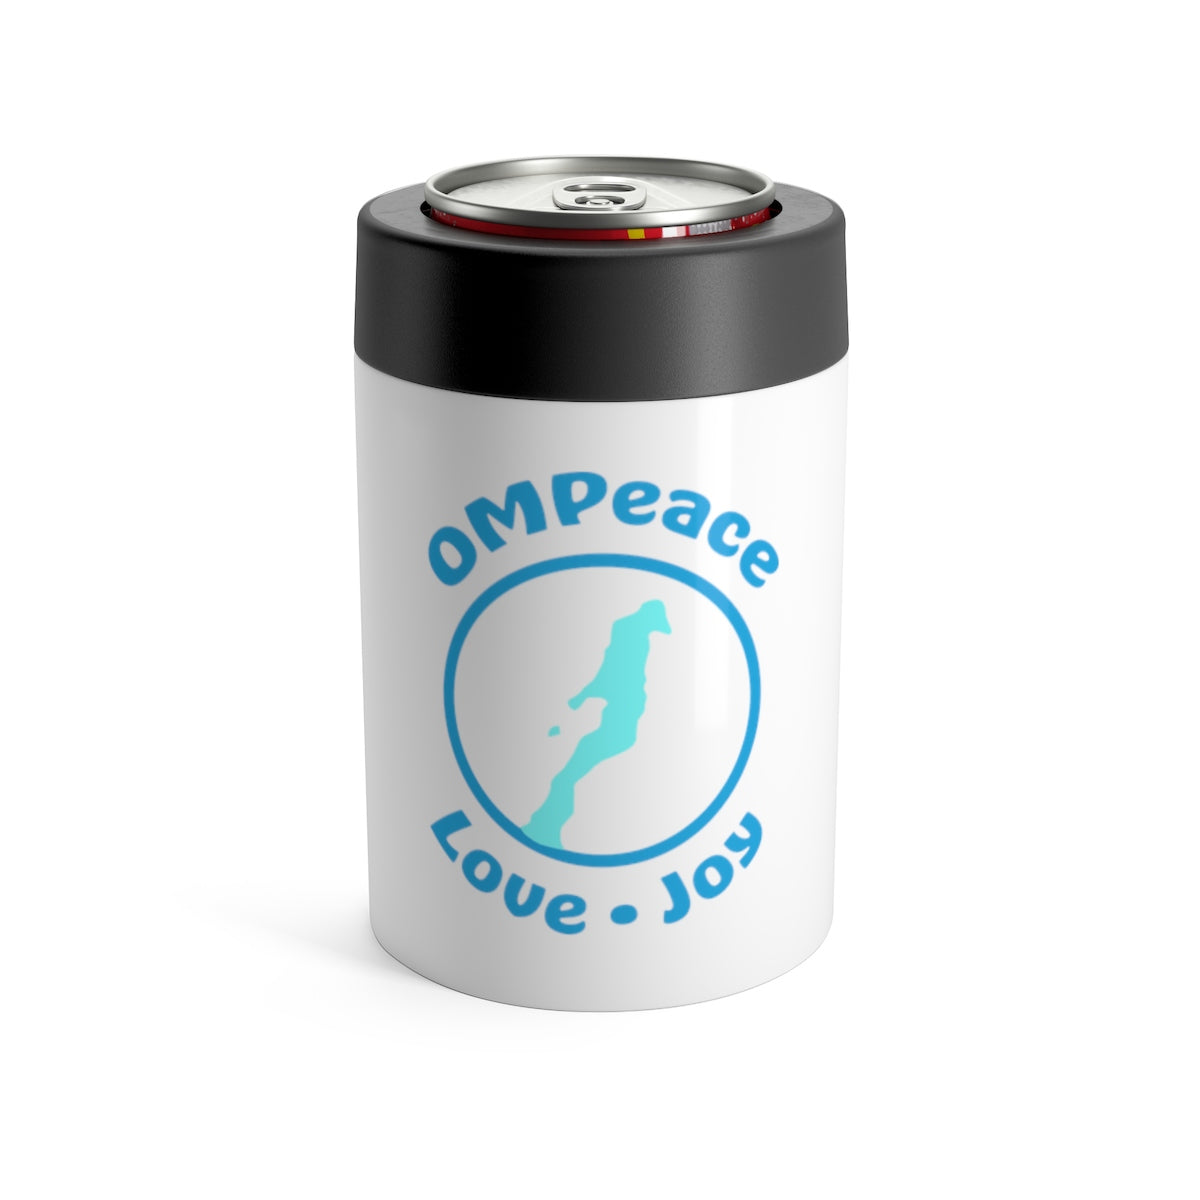 OMPeace White Stainless Steel Can Holder